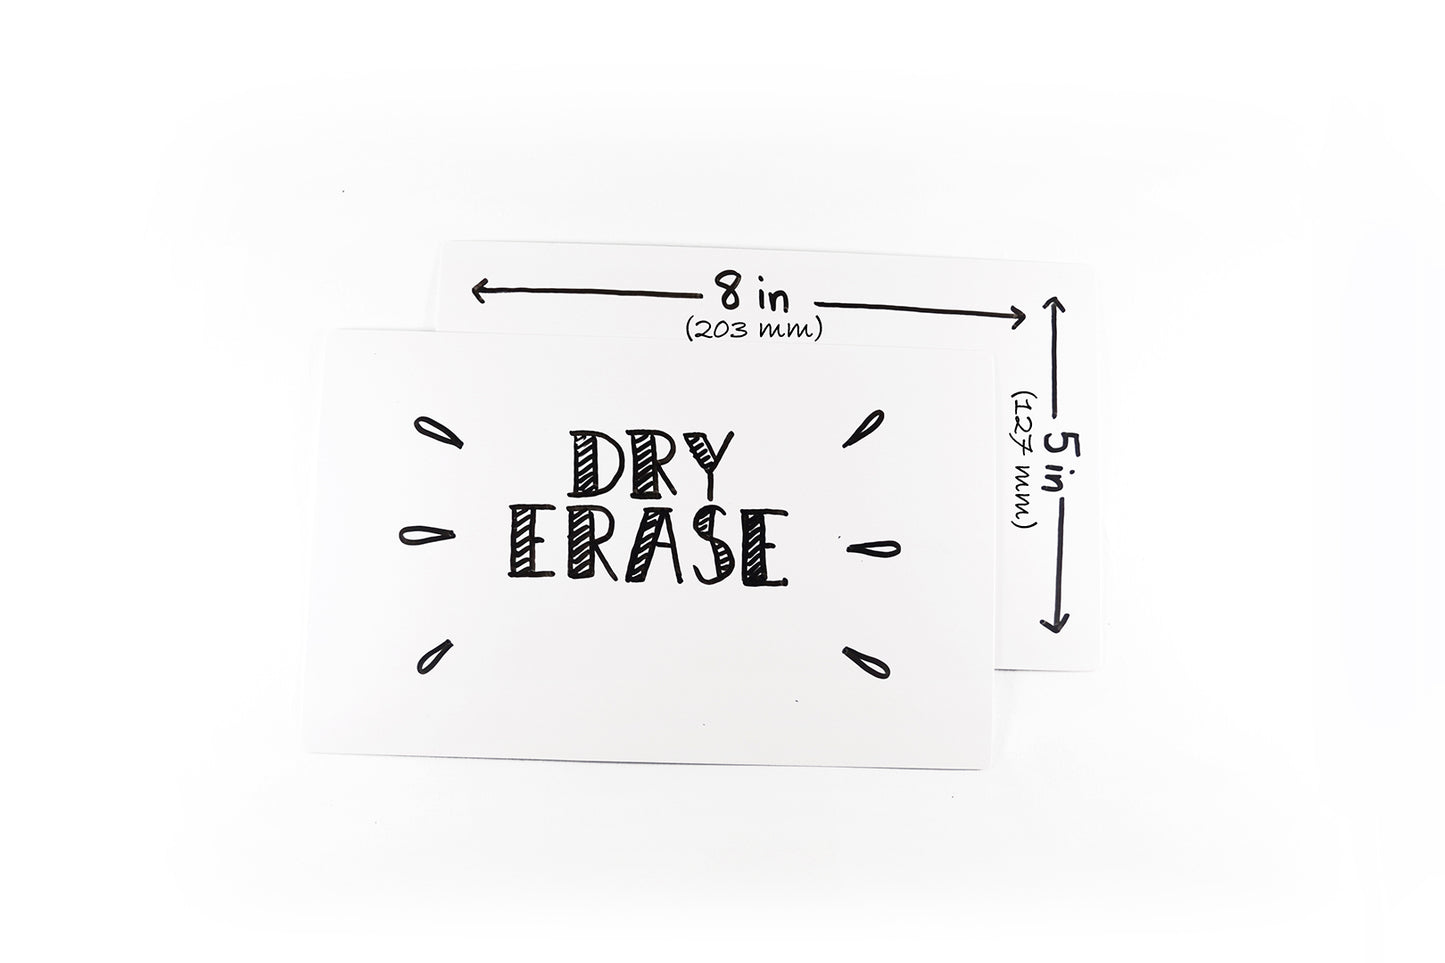 Reusable Giant Dry Erase Index Cards (5" x 8") – 30 Card Pack